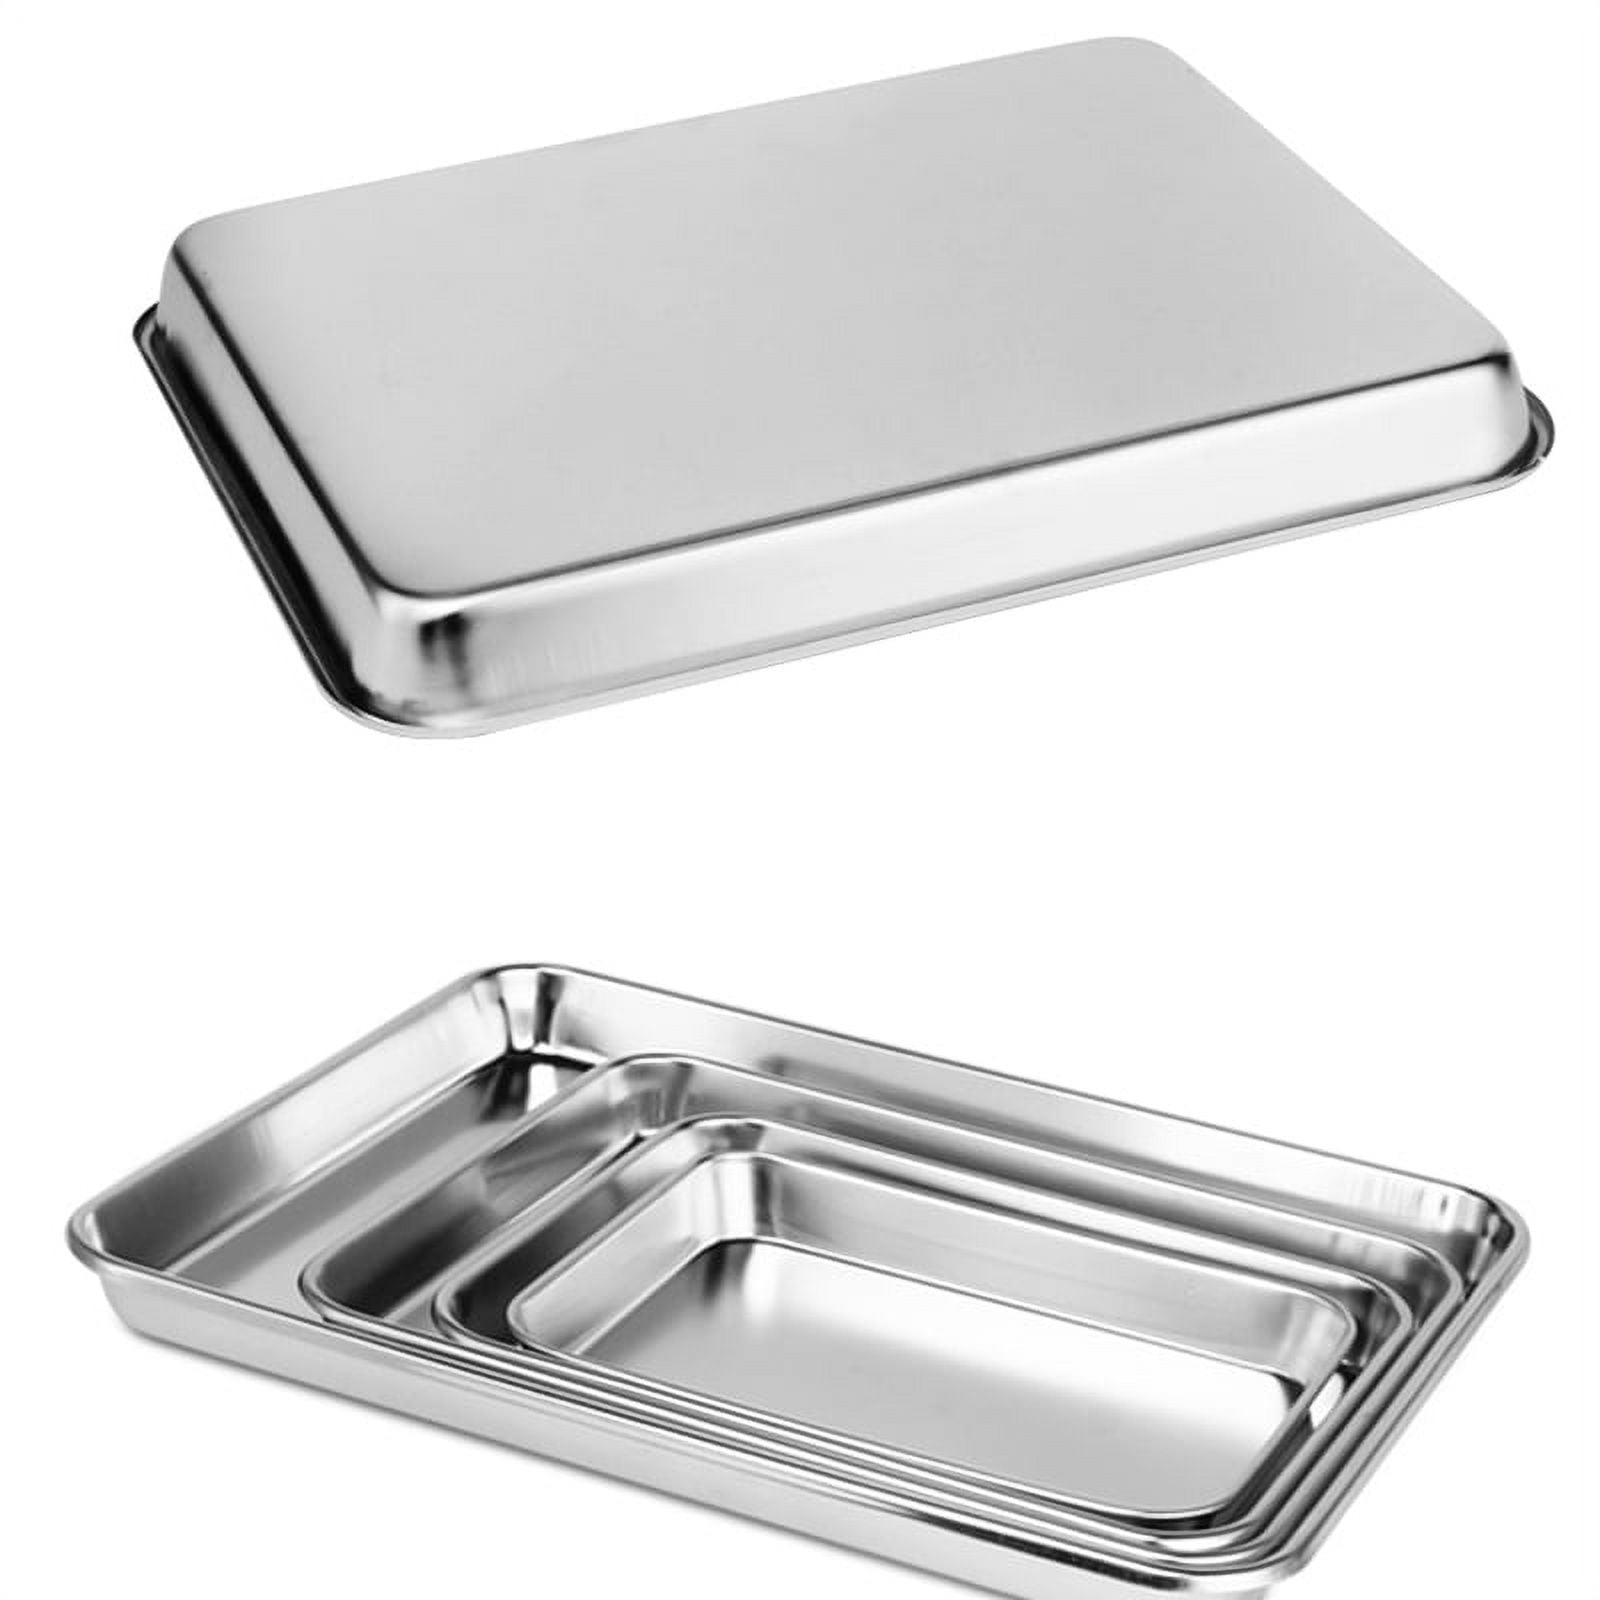 TeamFar Baking Sheet Cookie Sheet Set of 2, Pure Stainless Steel Baking Pan  Tray Professional, Non Toxic & Healthy, Mirror Finish & Rust Free, Easy